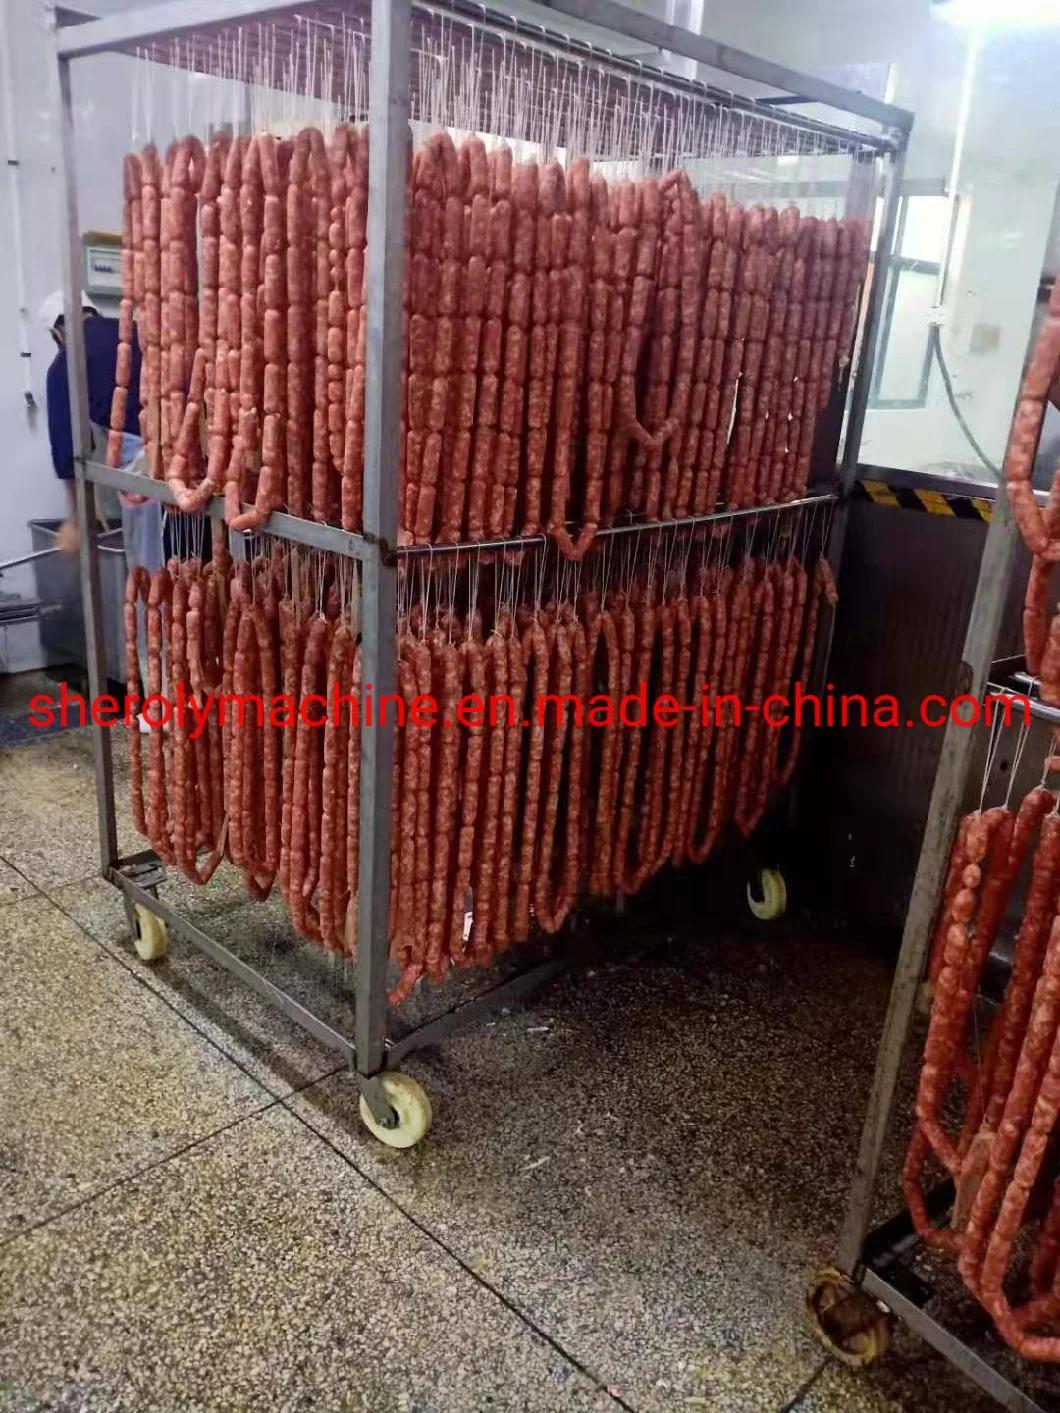 High Quality Electric Meat Smoker for Chicken So on